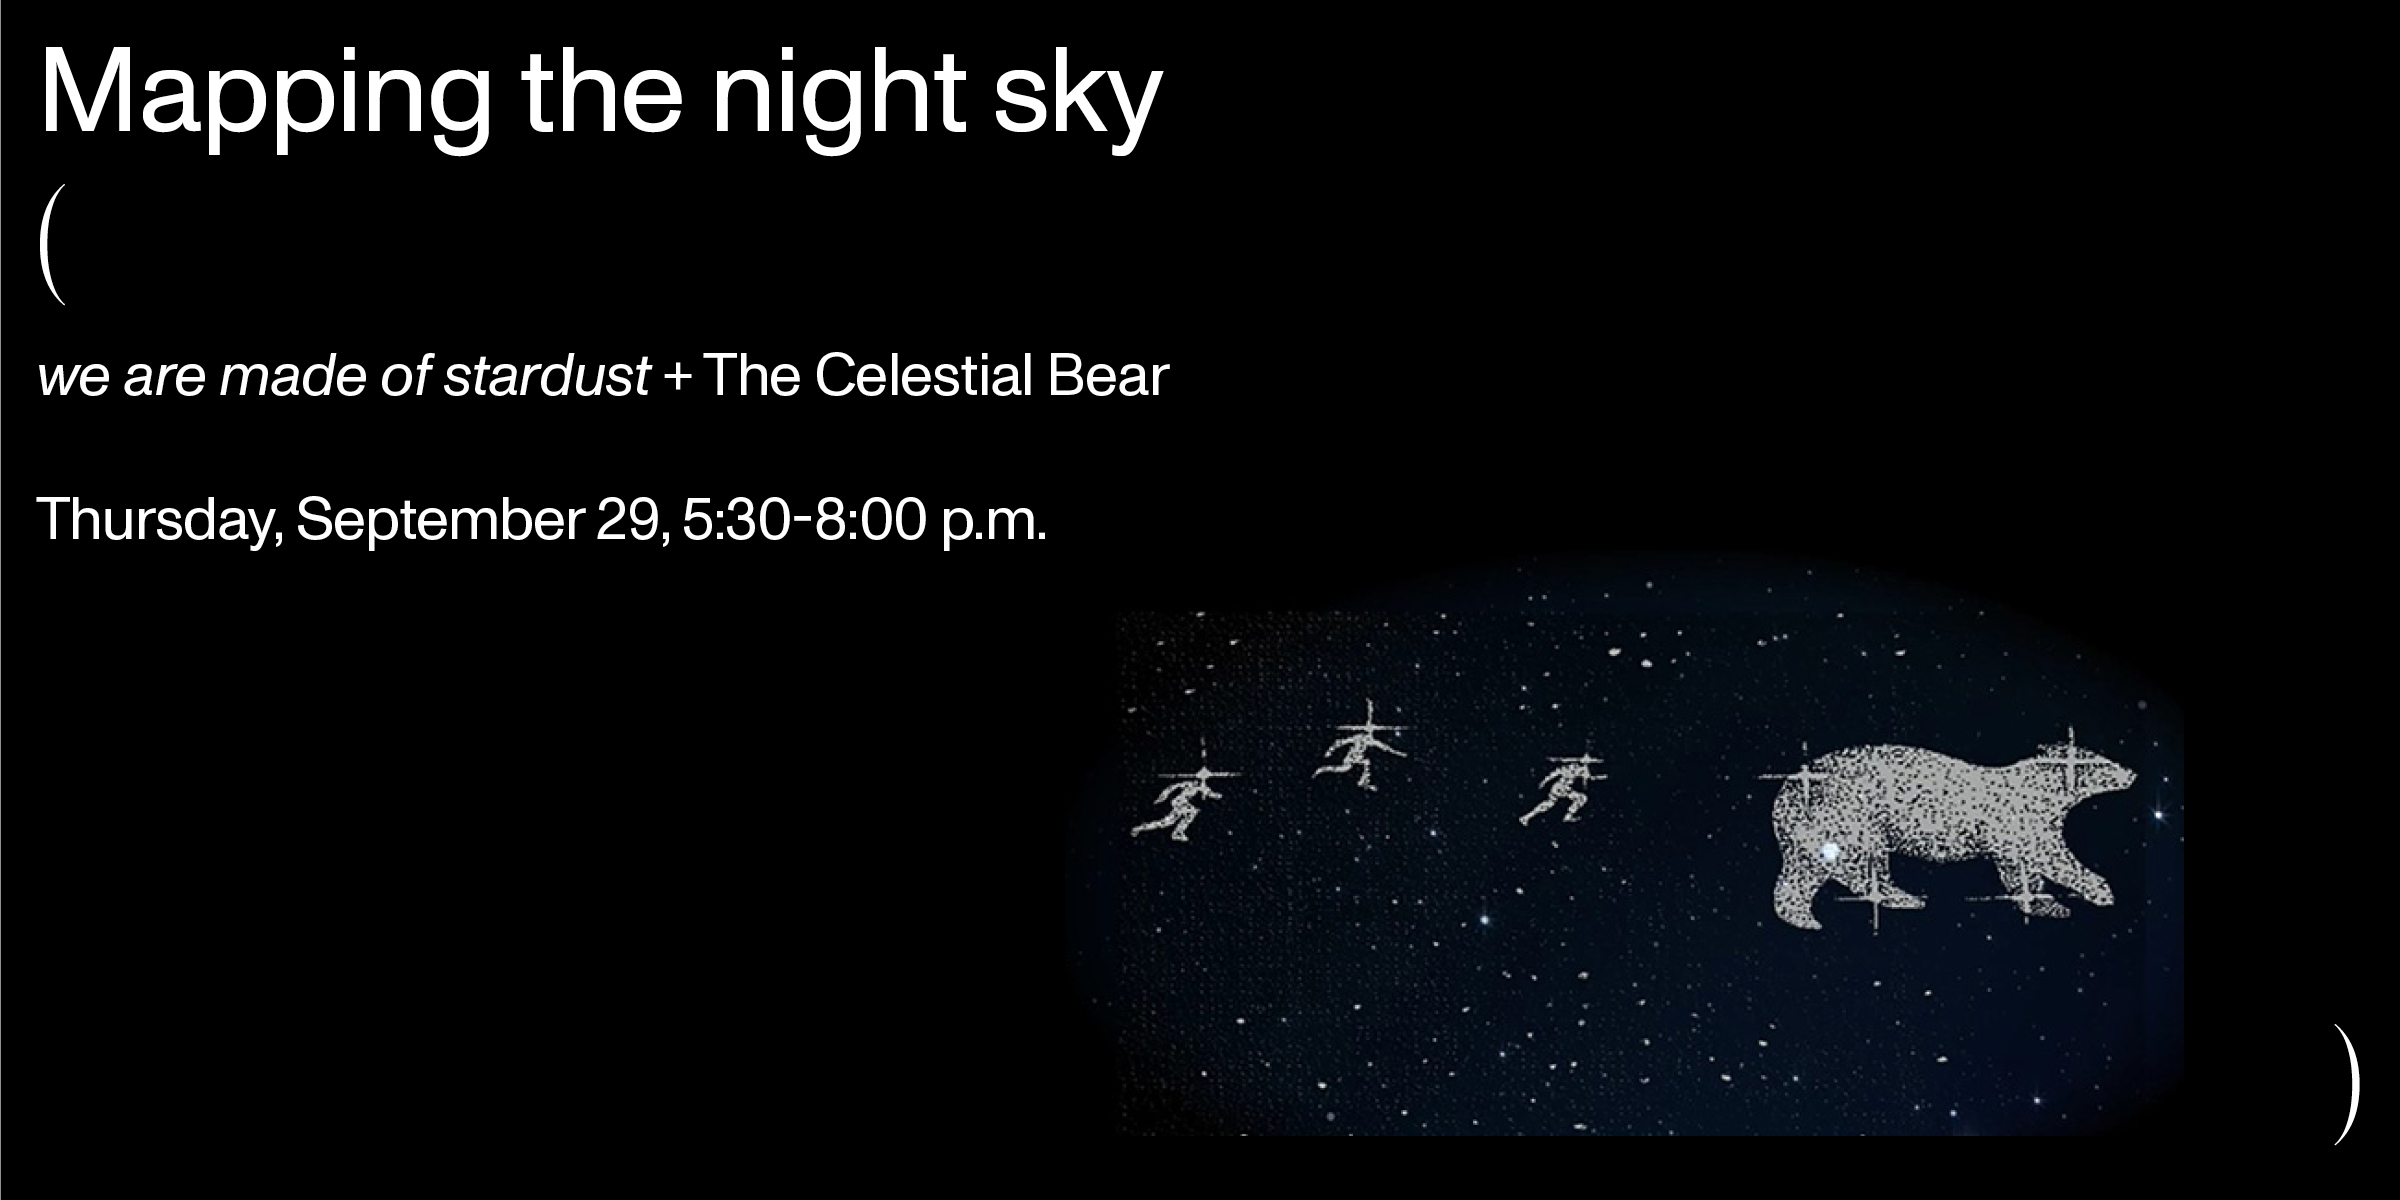 Mapping the night sky: we are made of stardust + The Celestial Bear